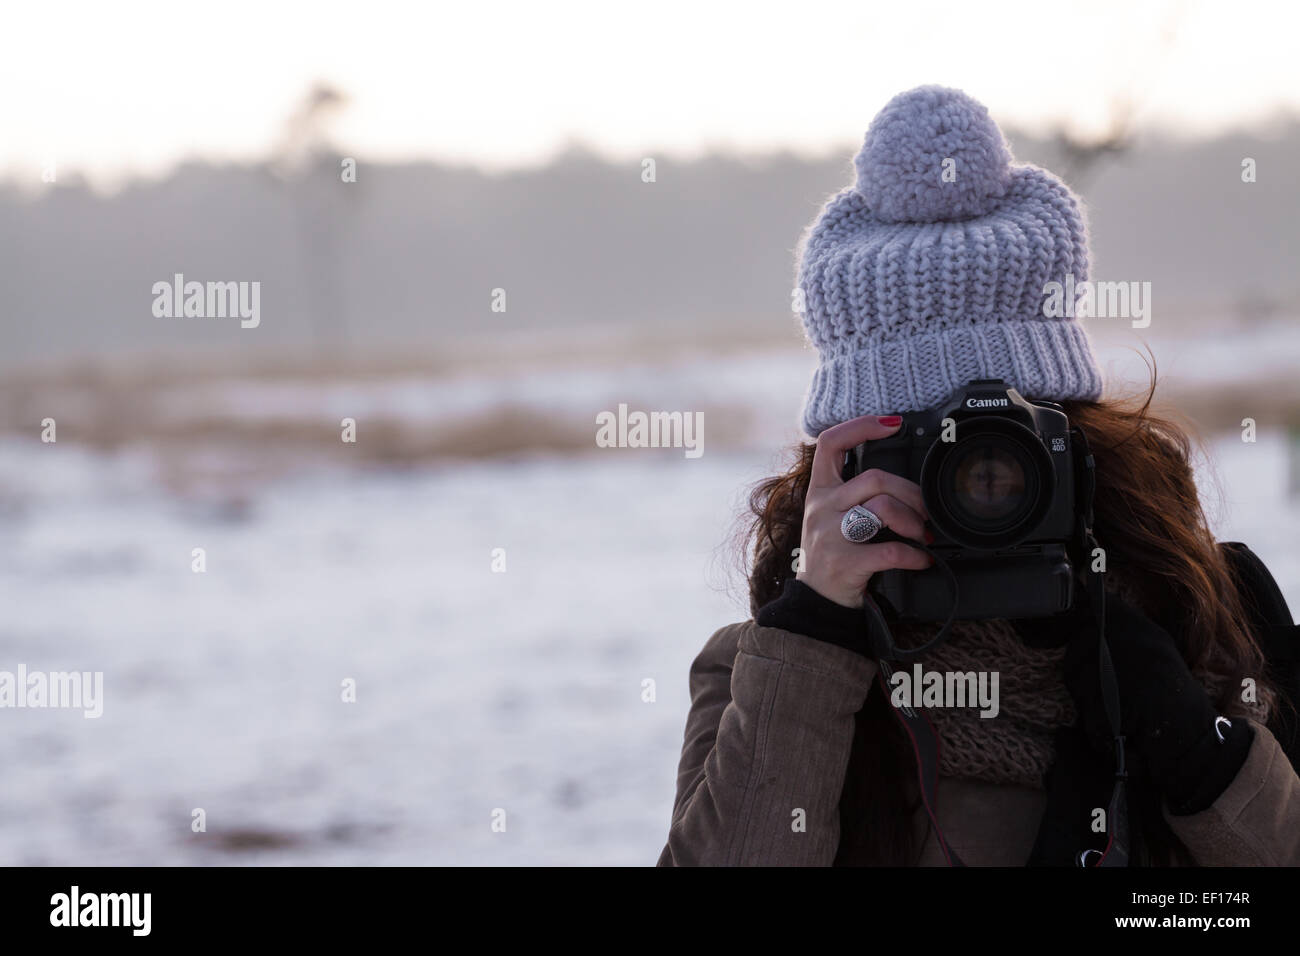 Girl wearing a hat and taking a picture at National park Loonse en Drunense duinen with a snow landscape in the background Stock Photo